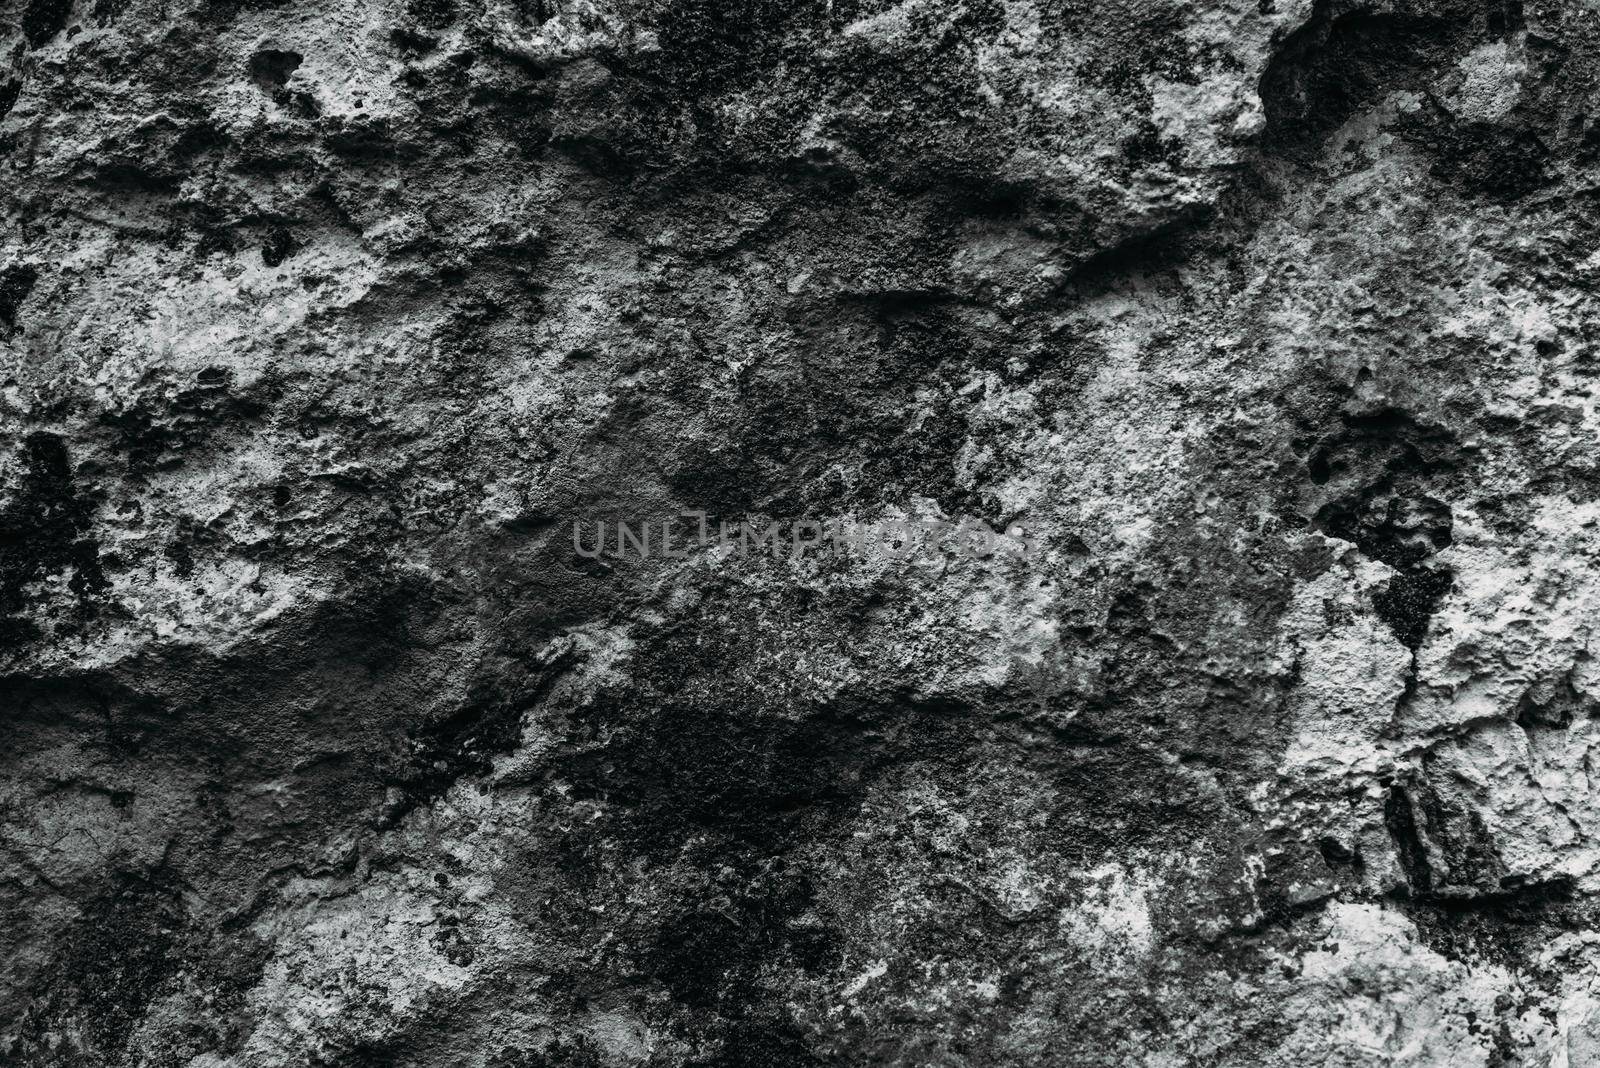 Rough stone background, texture, black and white image